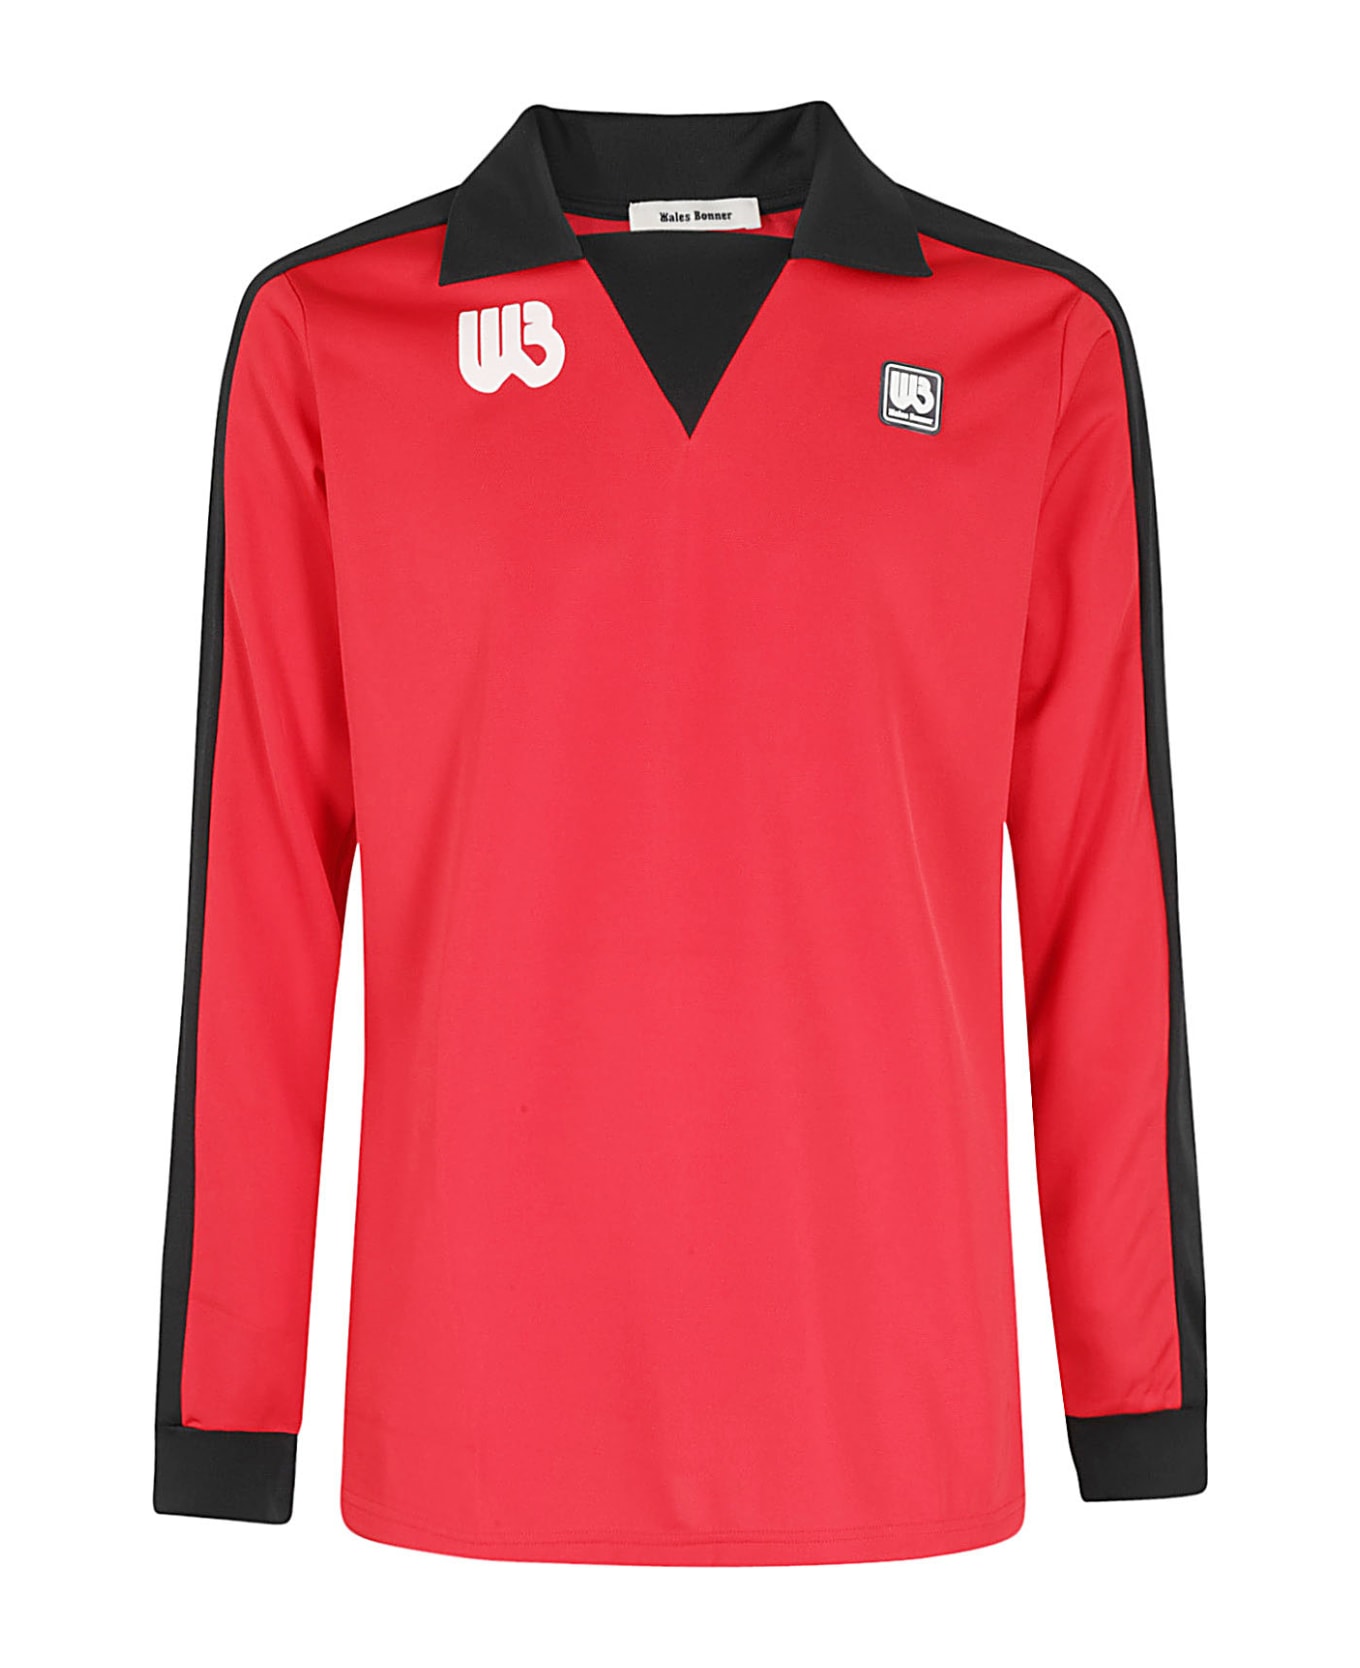 Wales Bonner Home Jersey - Red And Black